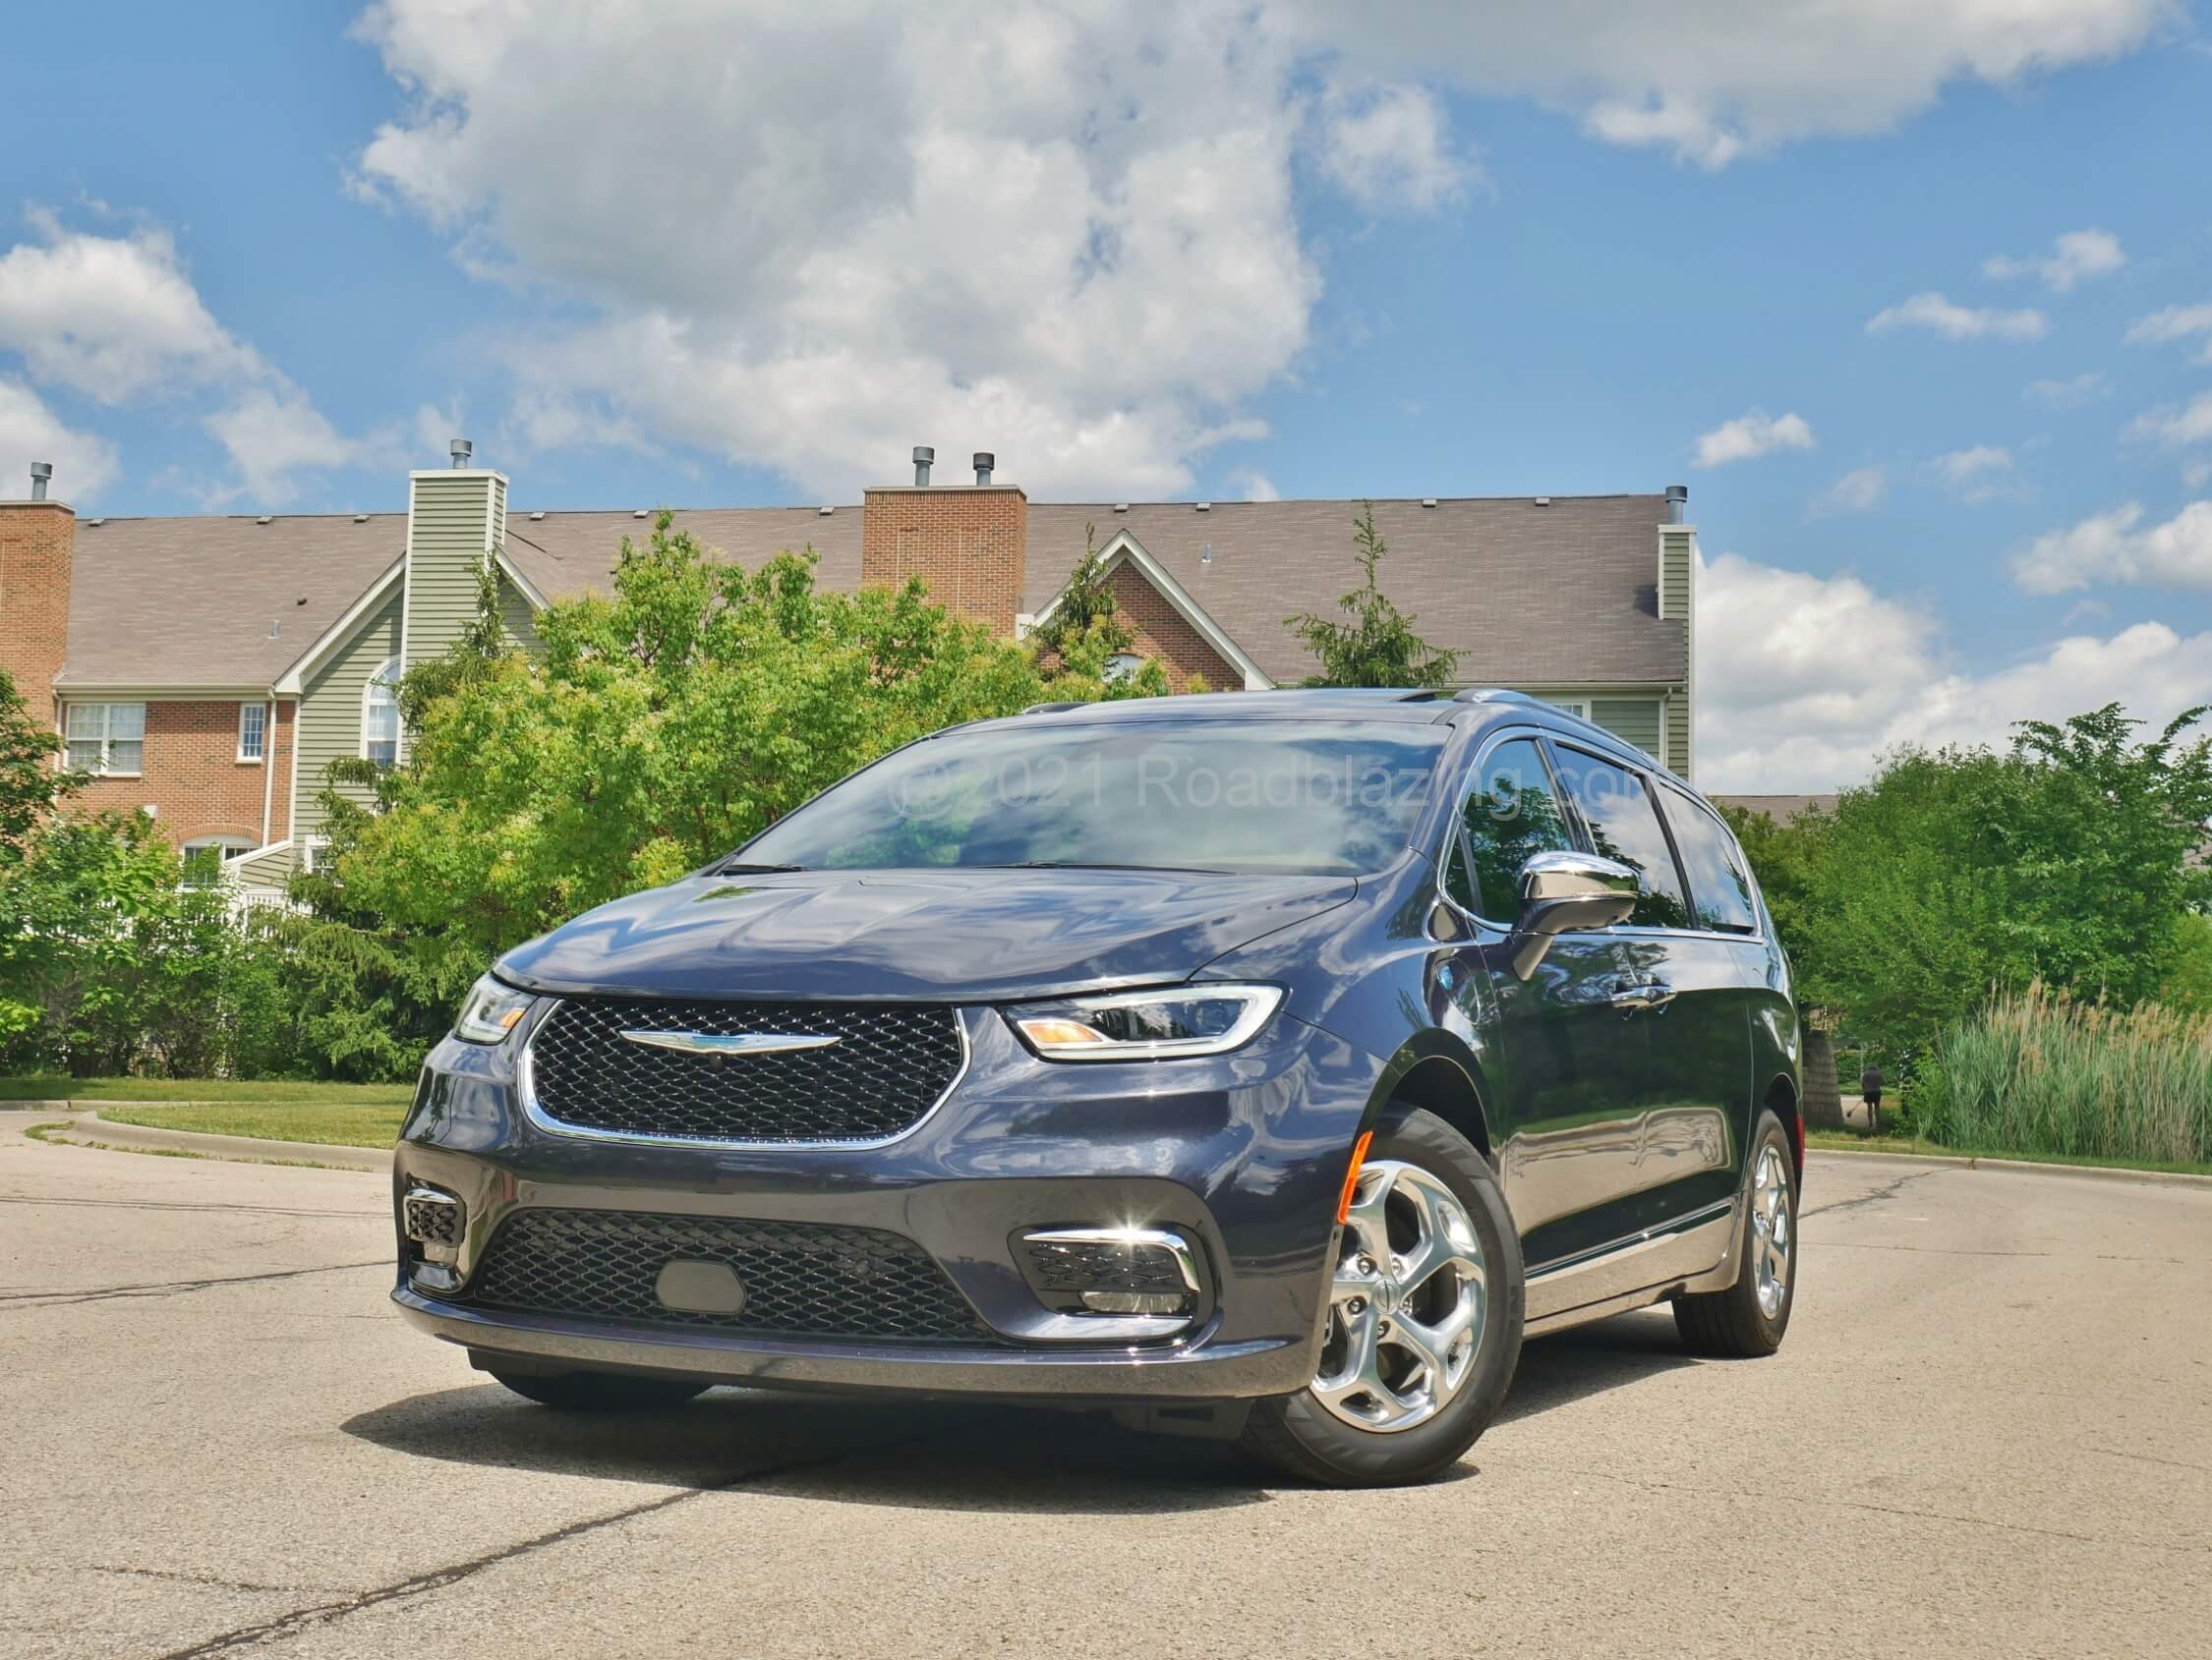 2021 Chrysler Pacifica Limited Hybrid PHEV: wind slicing streamlined engine more forward, sharp raked windscreen front end